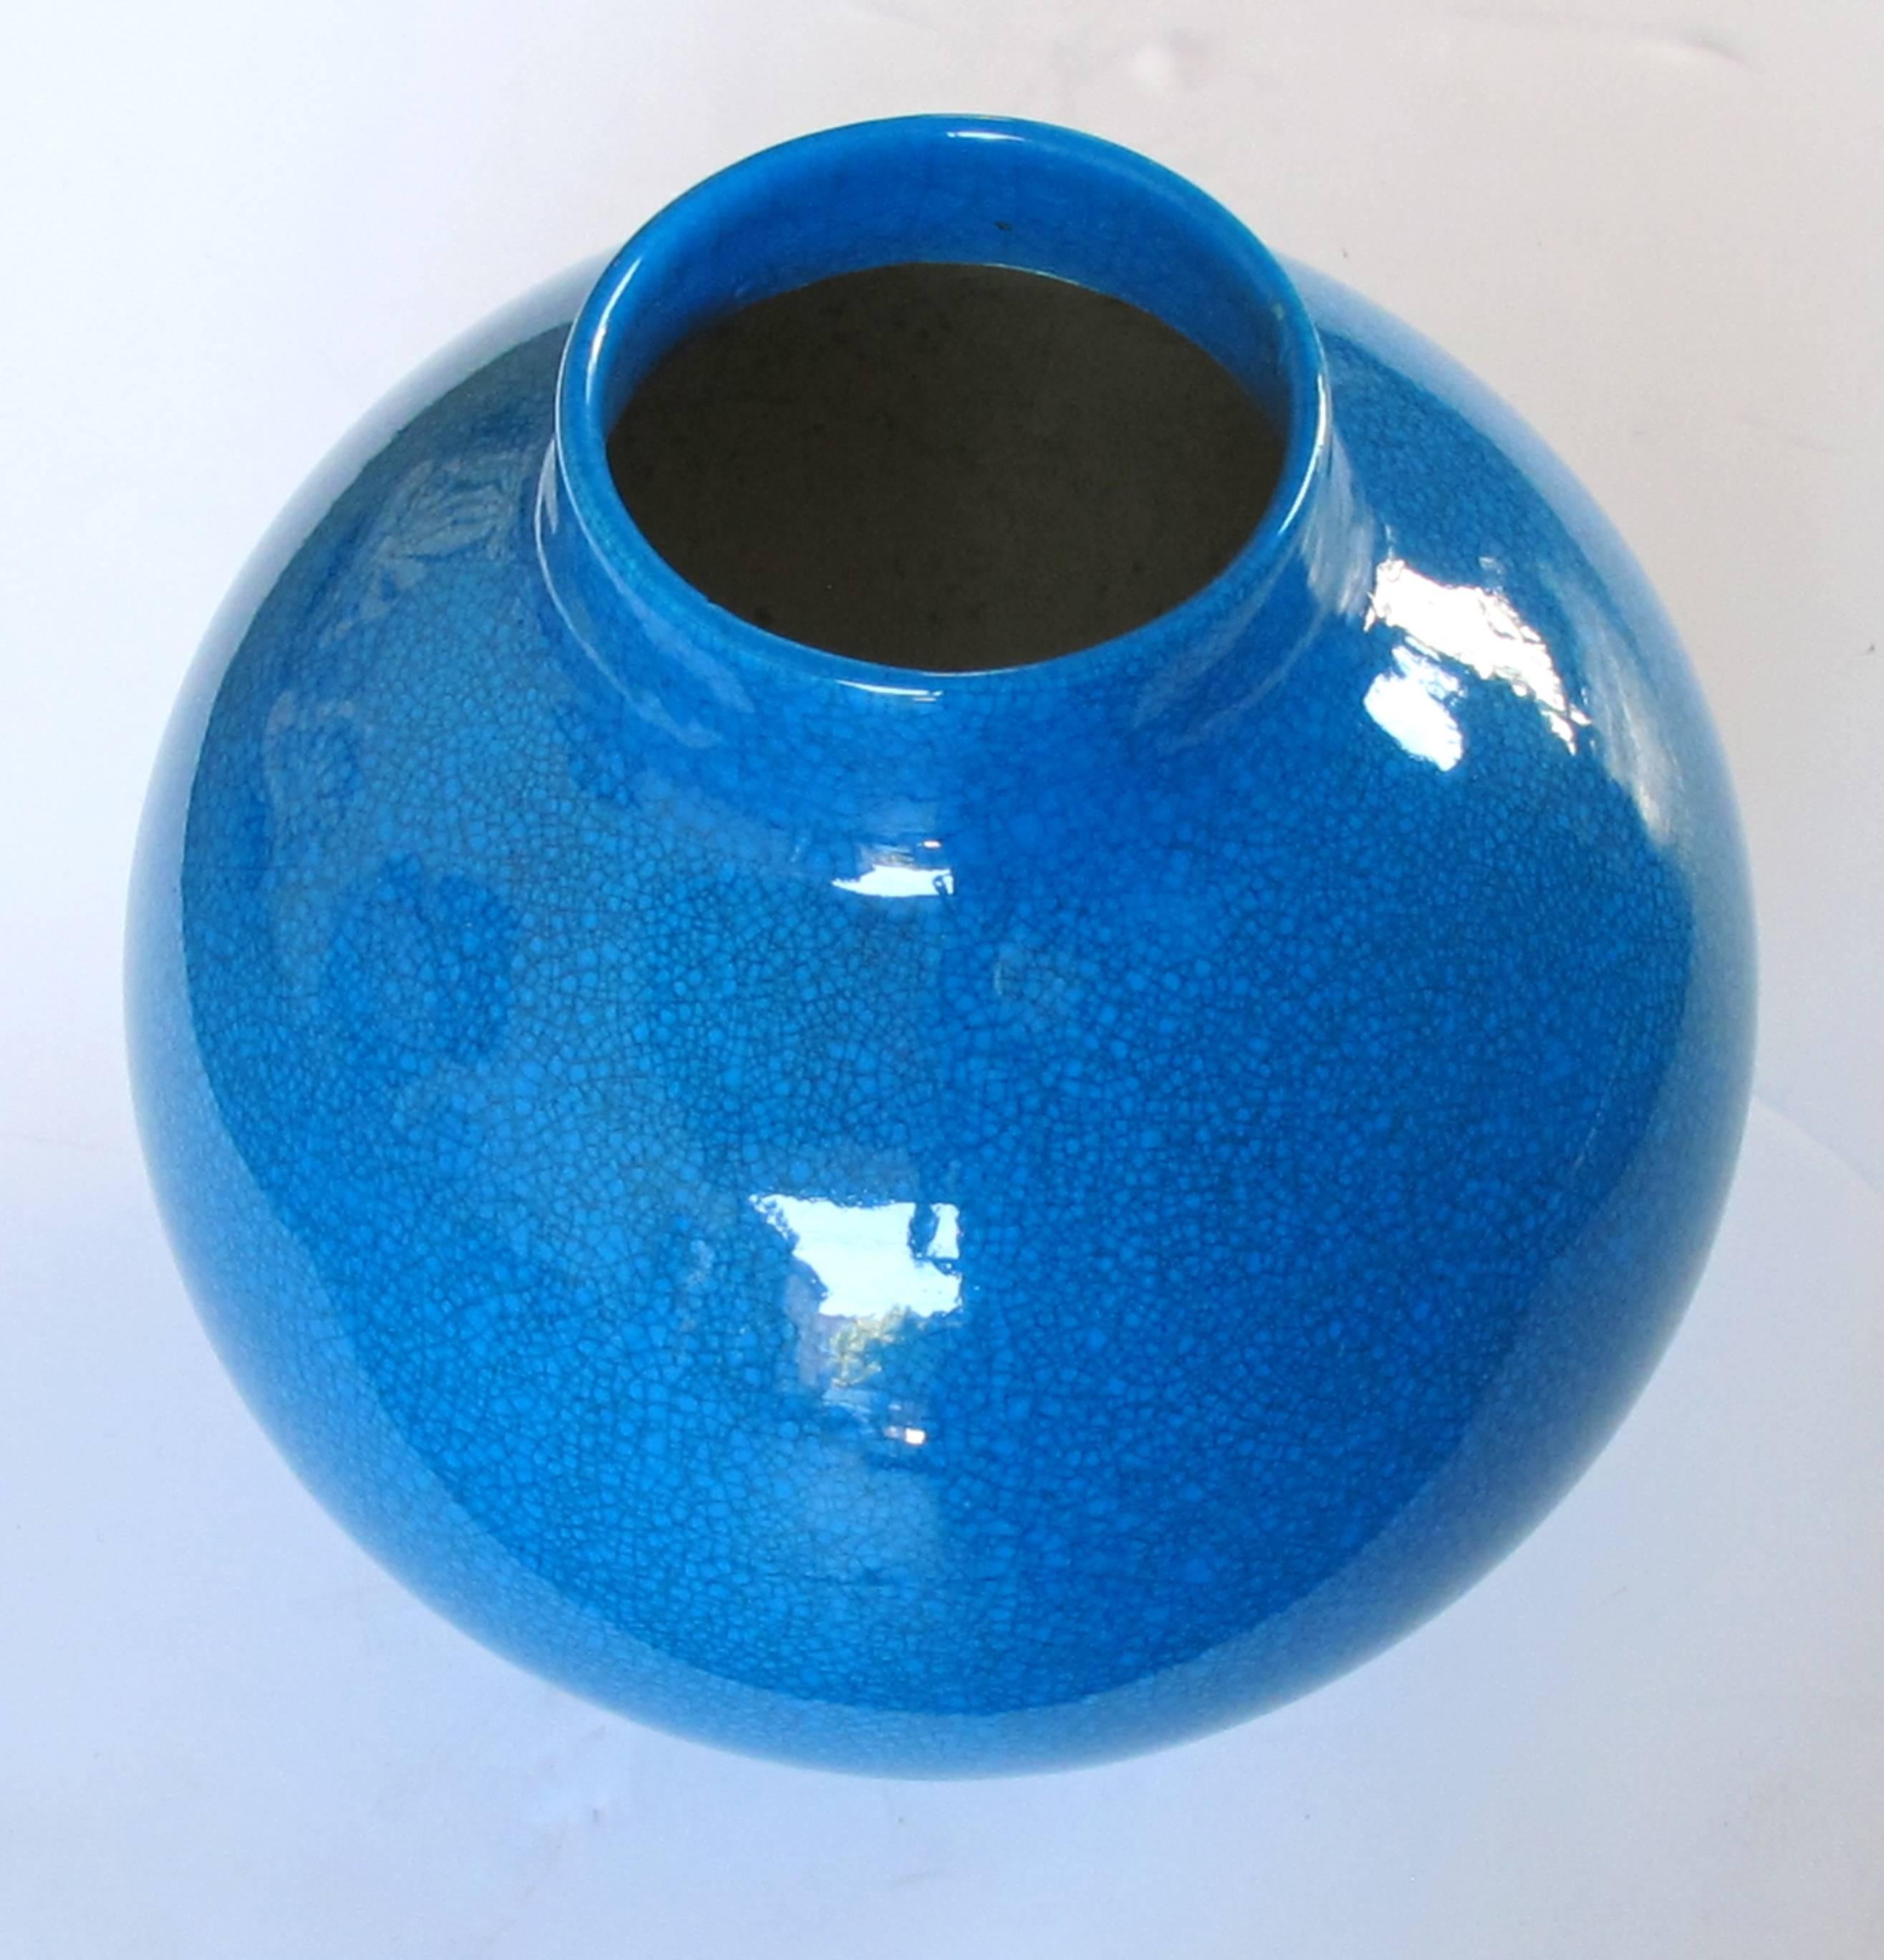 With short neck above a spheroid body; in a richly colored blue crackle-glaze; ink stamp to underside 'Boch Freres, La Louviere'.